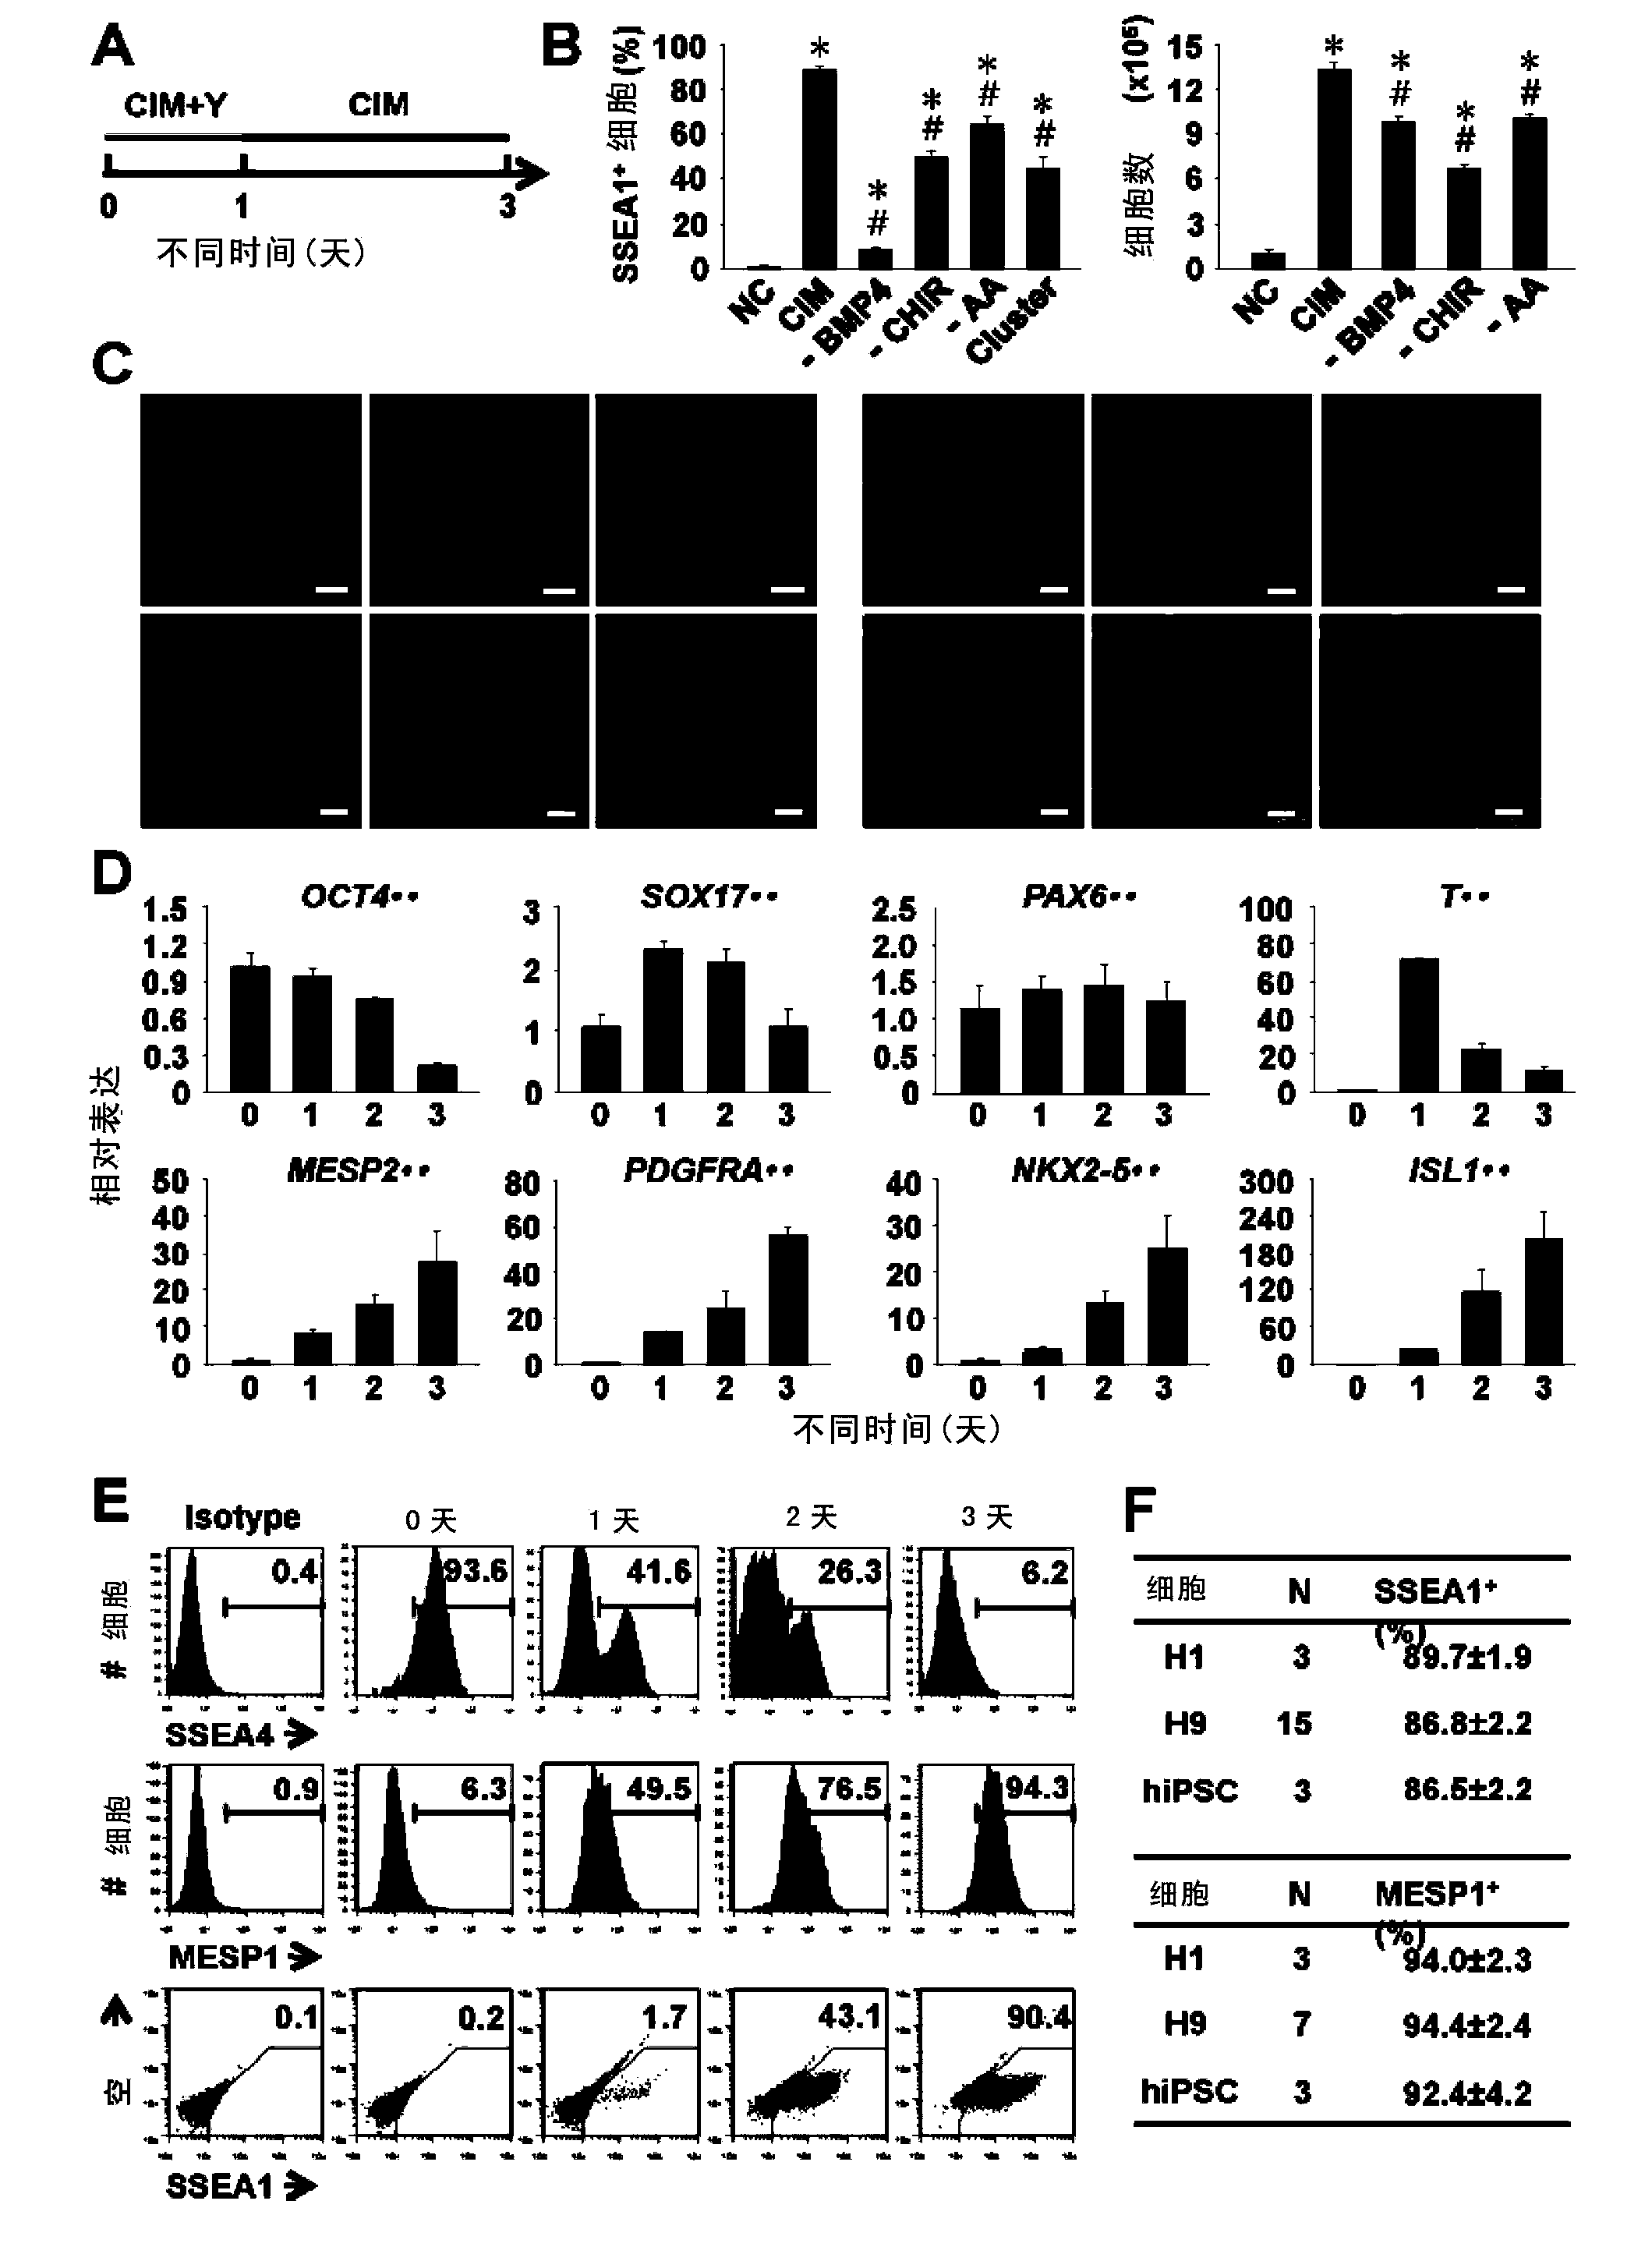 Methods for preparing pleuripotent cardiovascular progenitor cells and maintaining cardiovascular differentiation capacity